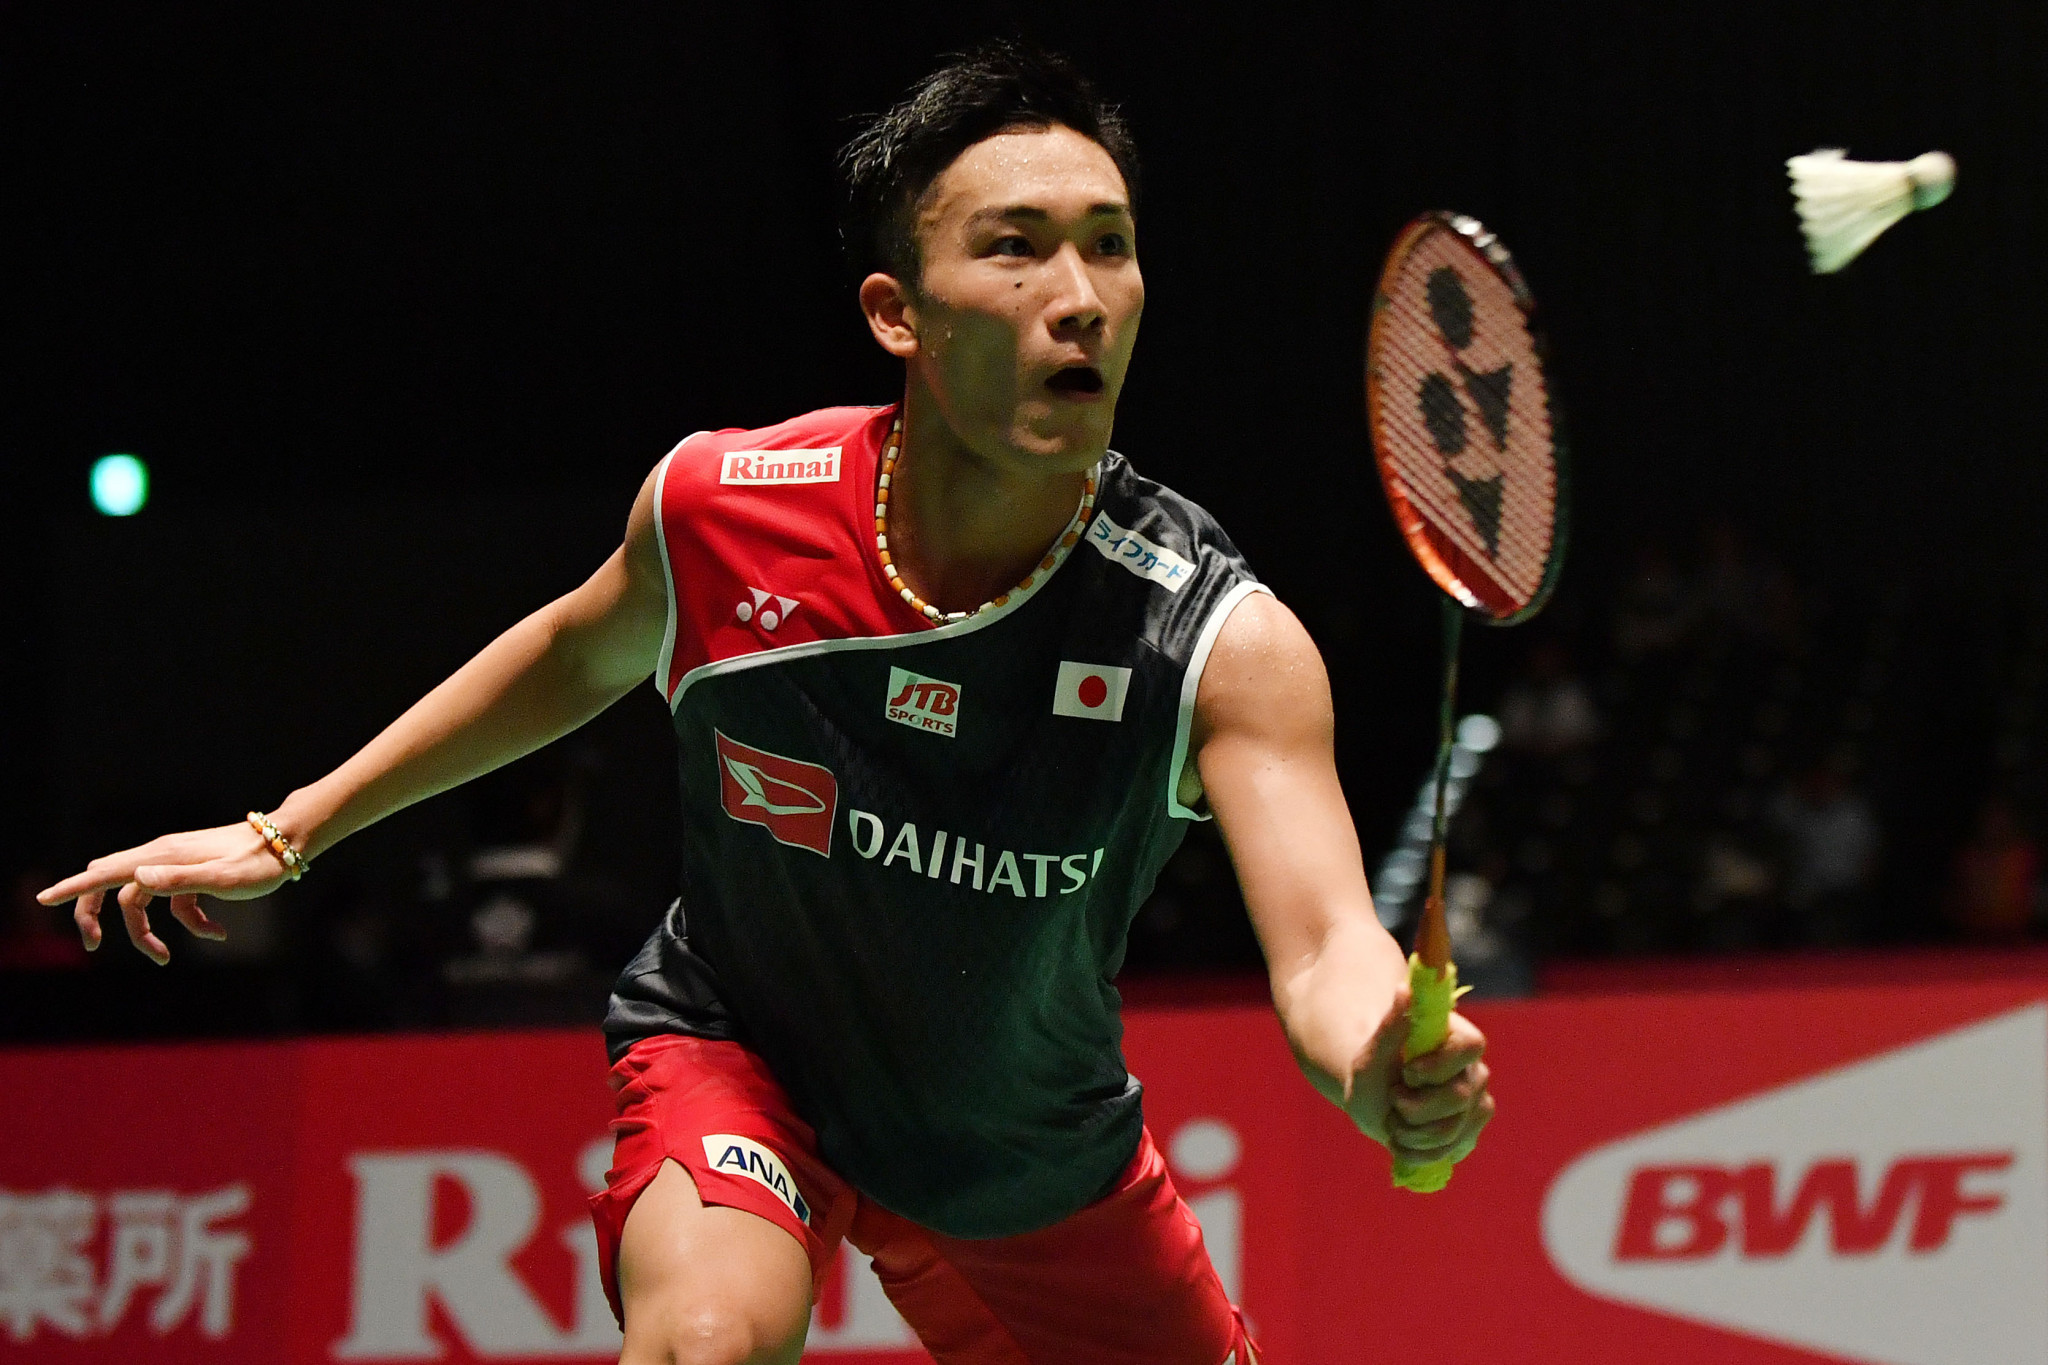 Reigning world champion Kento Momota set up a mouthwatering quarter final with double Olympic gold medallist Lin Dan ©Getty Images